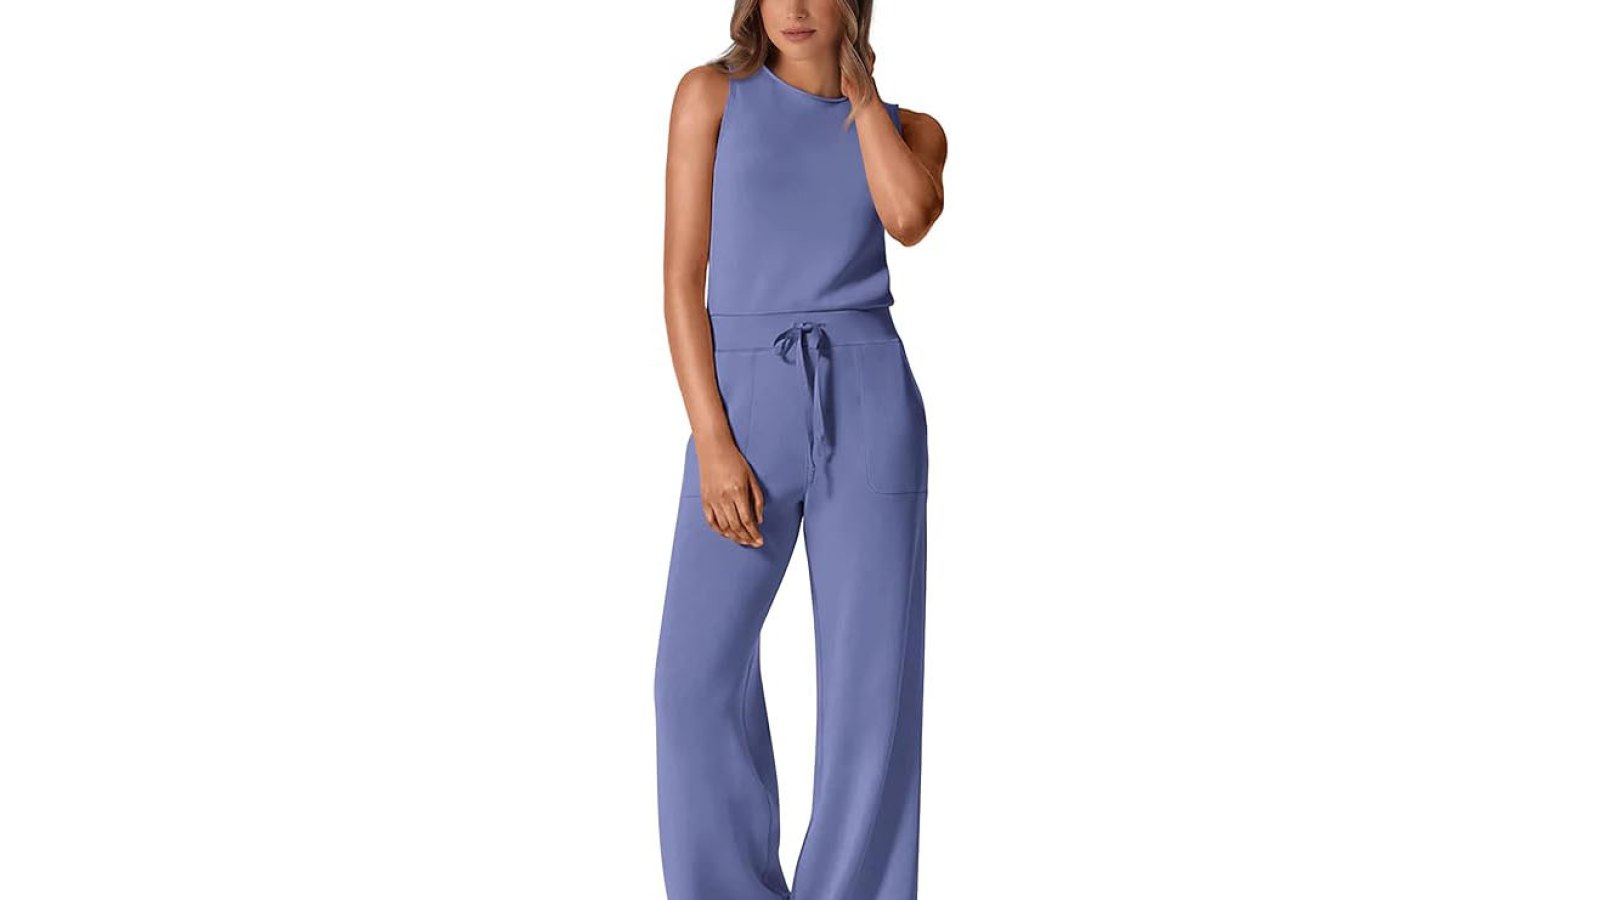 The Flattering Loungewear Jumpsuit You'll Want to Wear from Day to